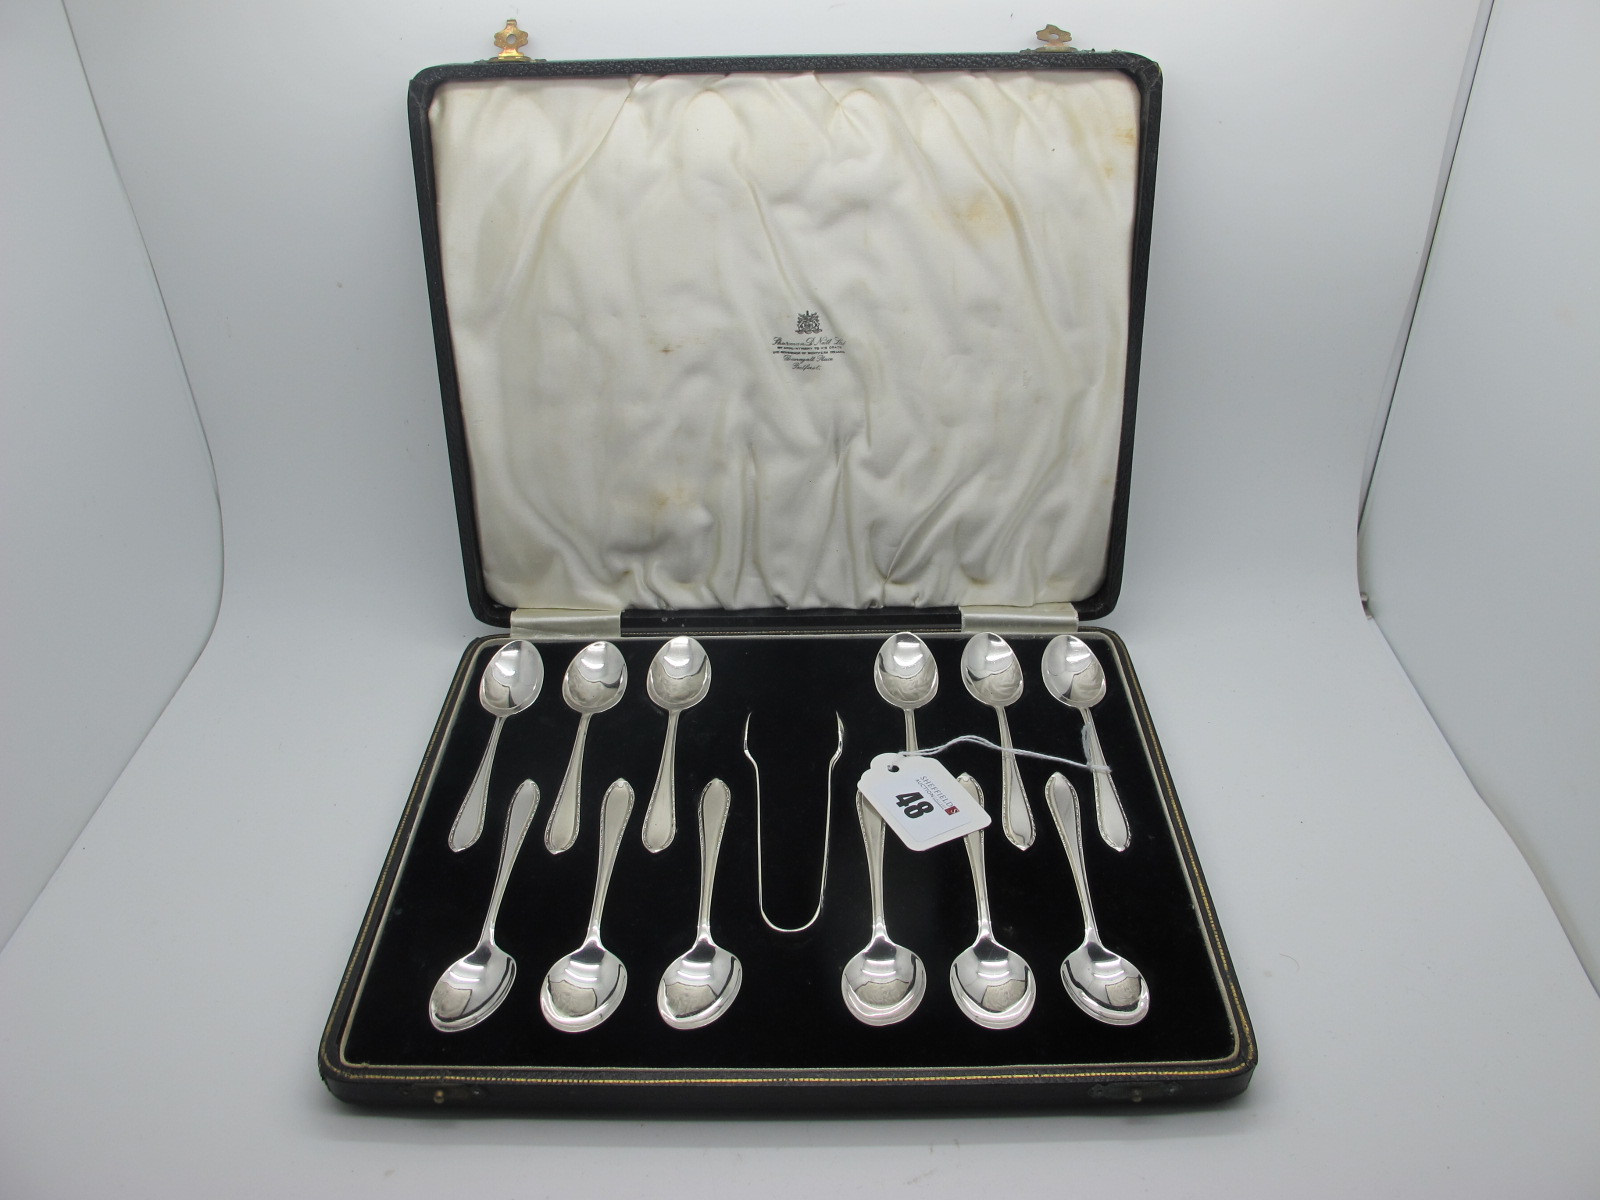 A Set of Twelve Hallmarked Silver Teaspoons, Birmingham 1939, in original fitted case, complete with